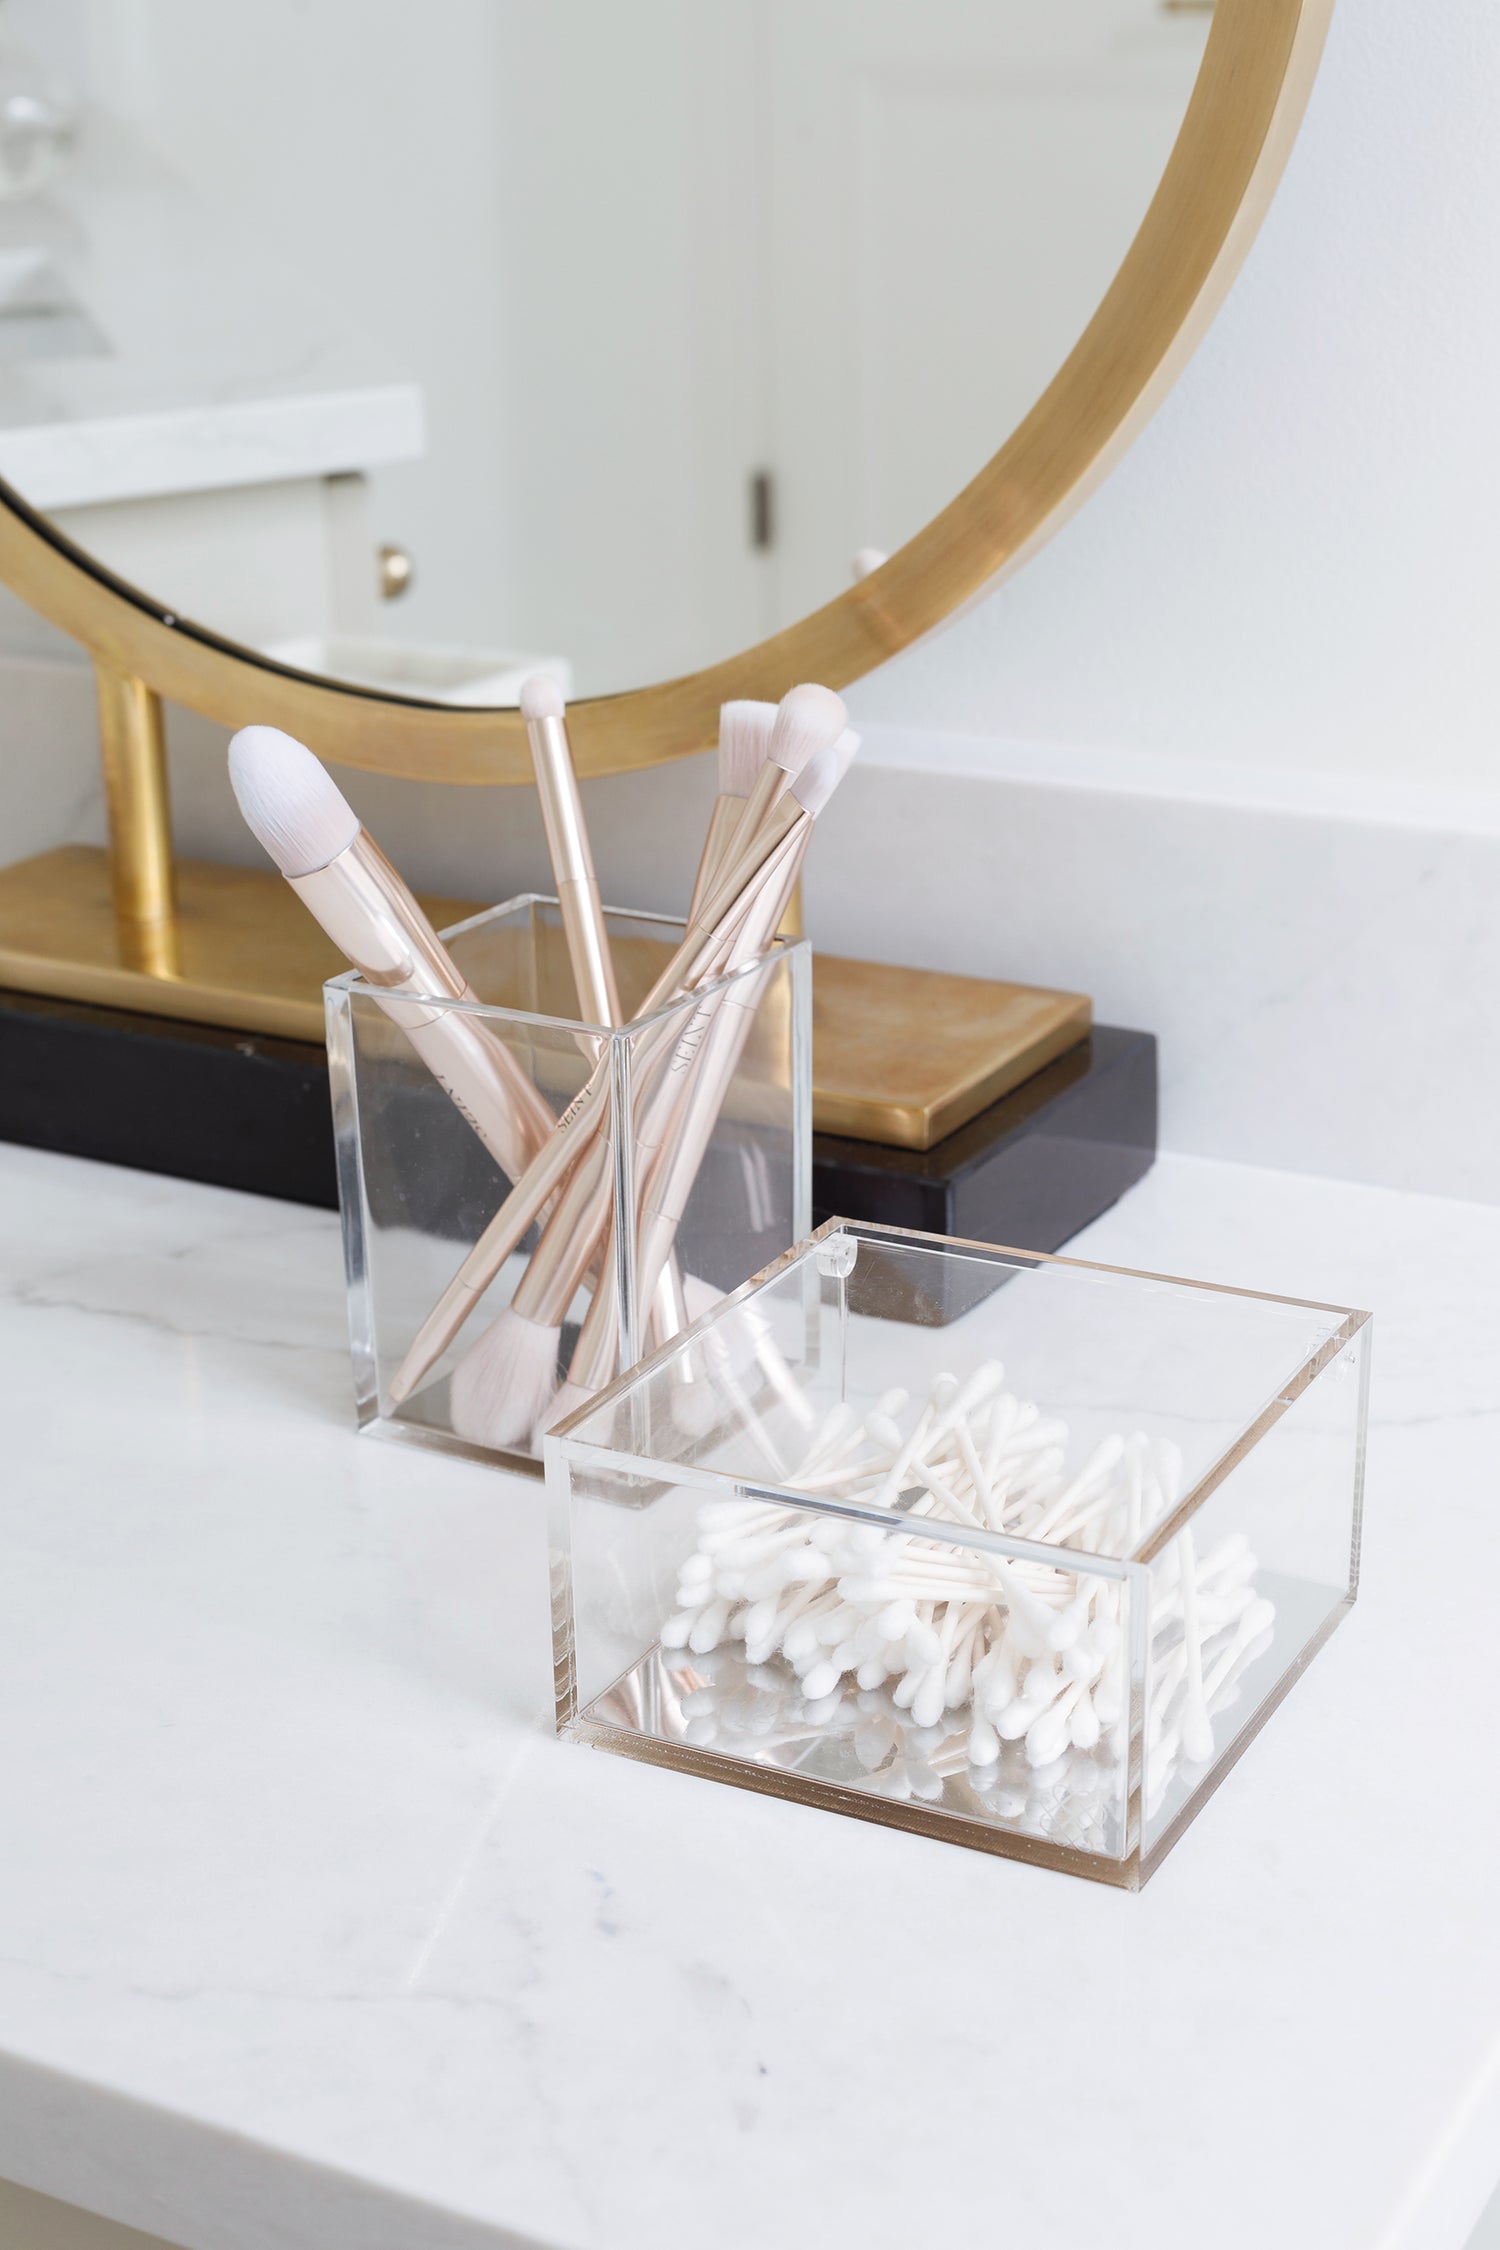 Makeup brushes and cotton swabs held in acrylic storage containers.